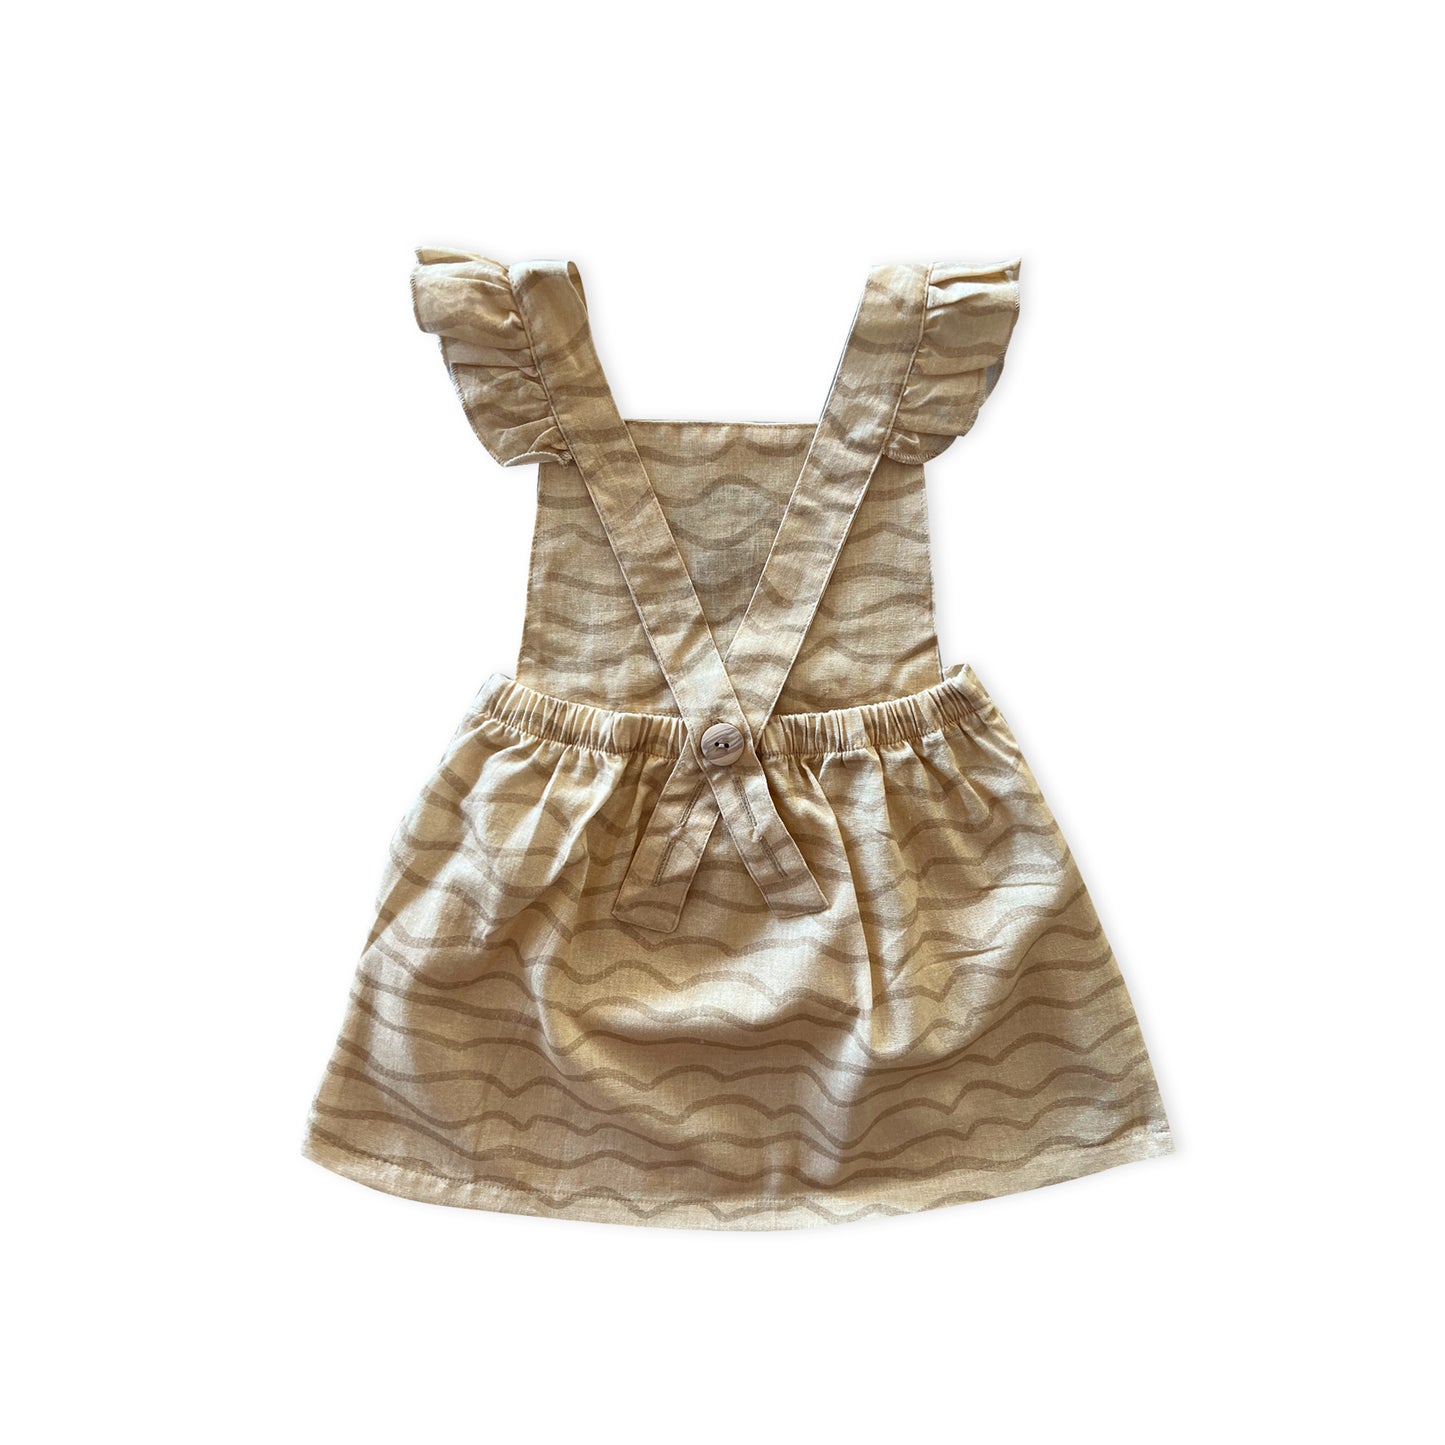 MARZIPAN ‘WAVES’ DRESS Aged 6m to 5 Yrs